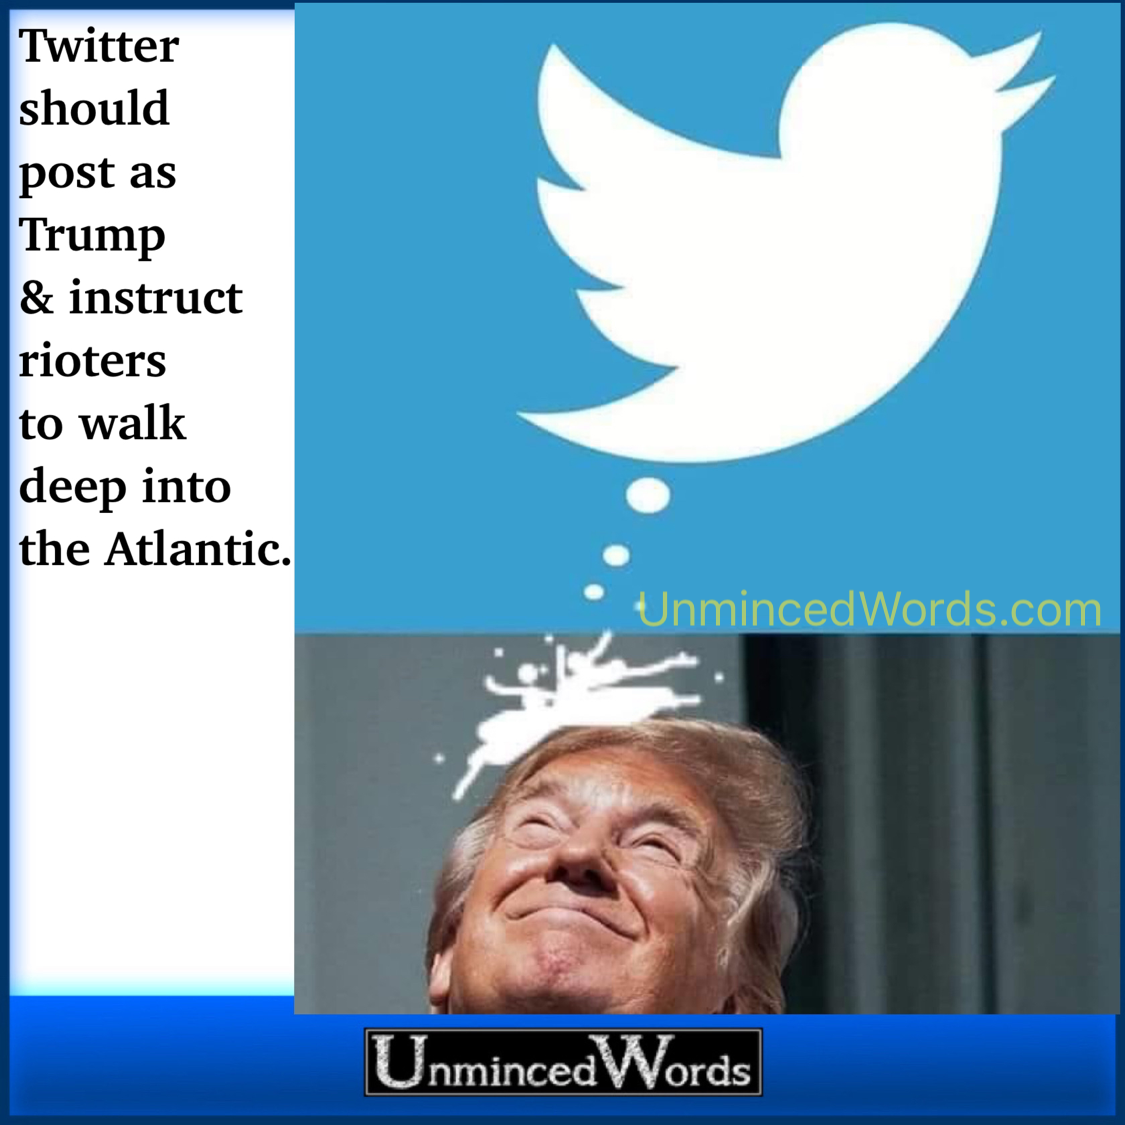 Twitter should post as Trump & instruct rioters to walk deep into the Atlantic